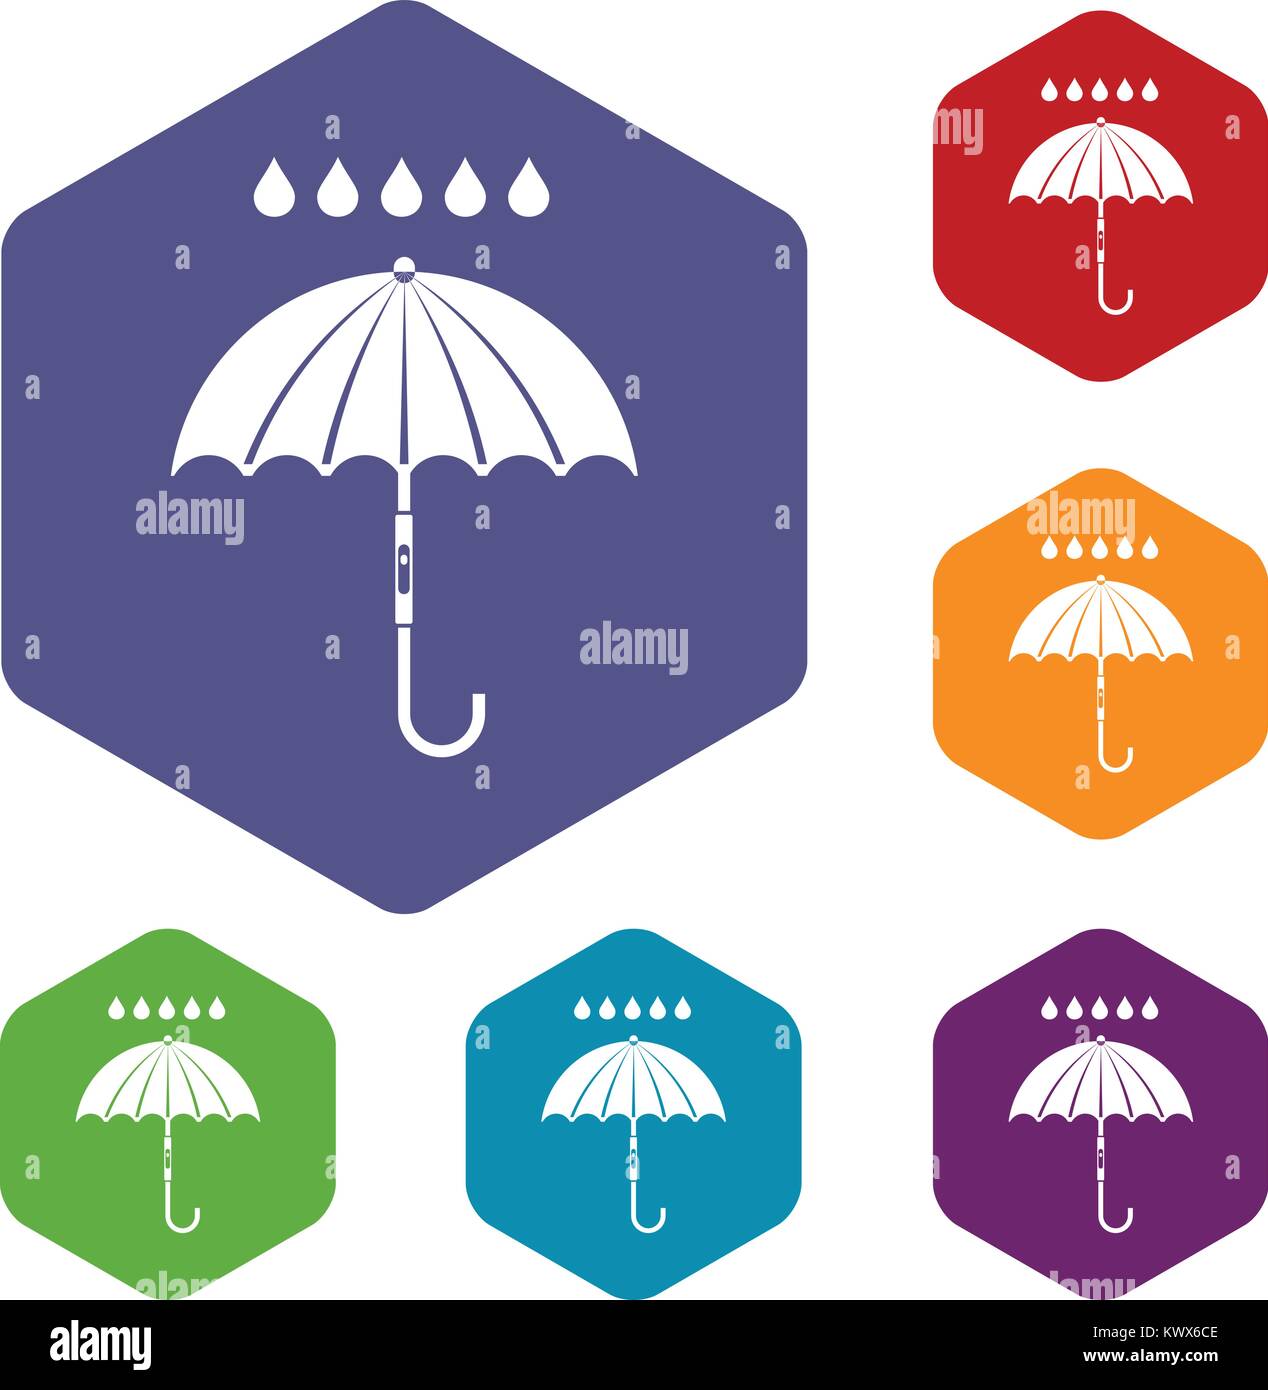 Umbrella and rain drops icons set rhombus in different colors isolated on white background Stock Vector